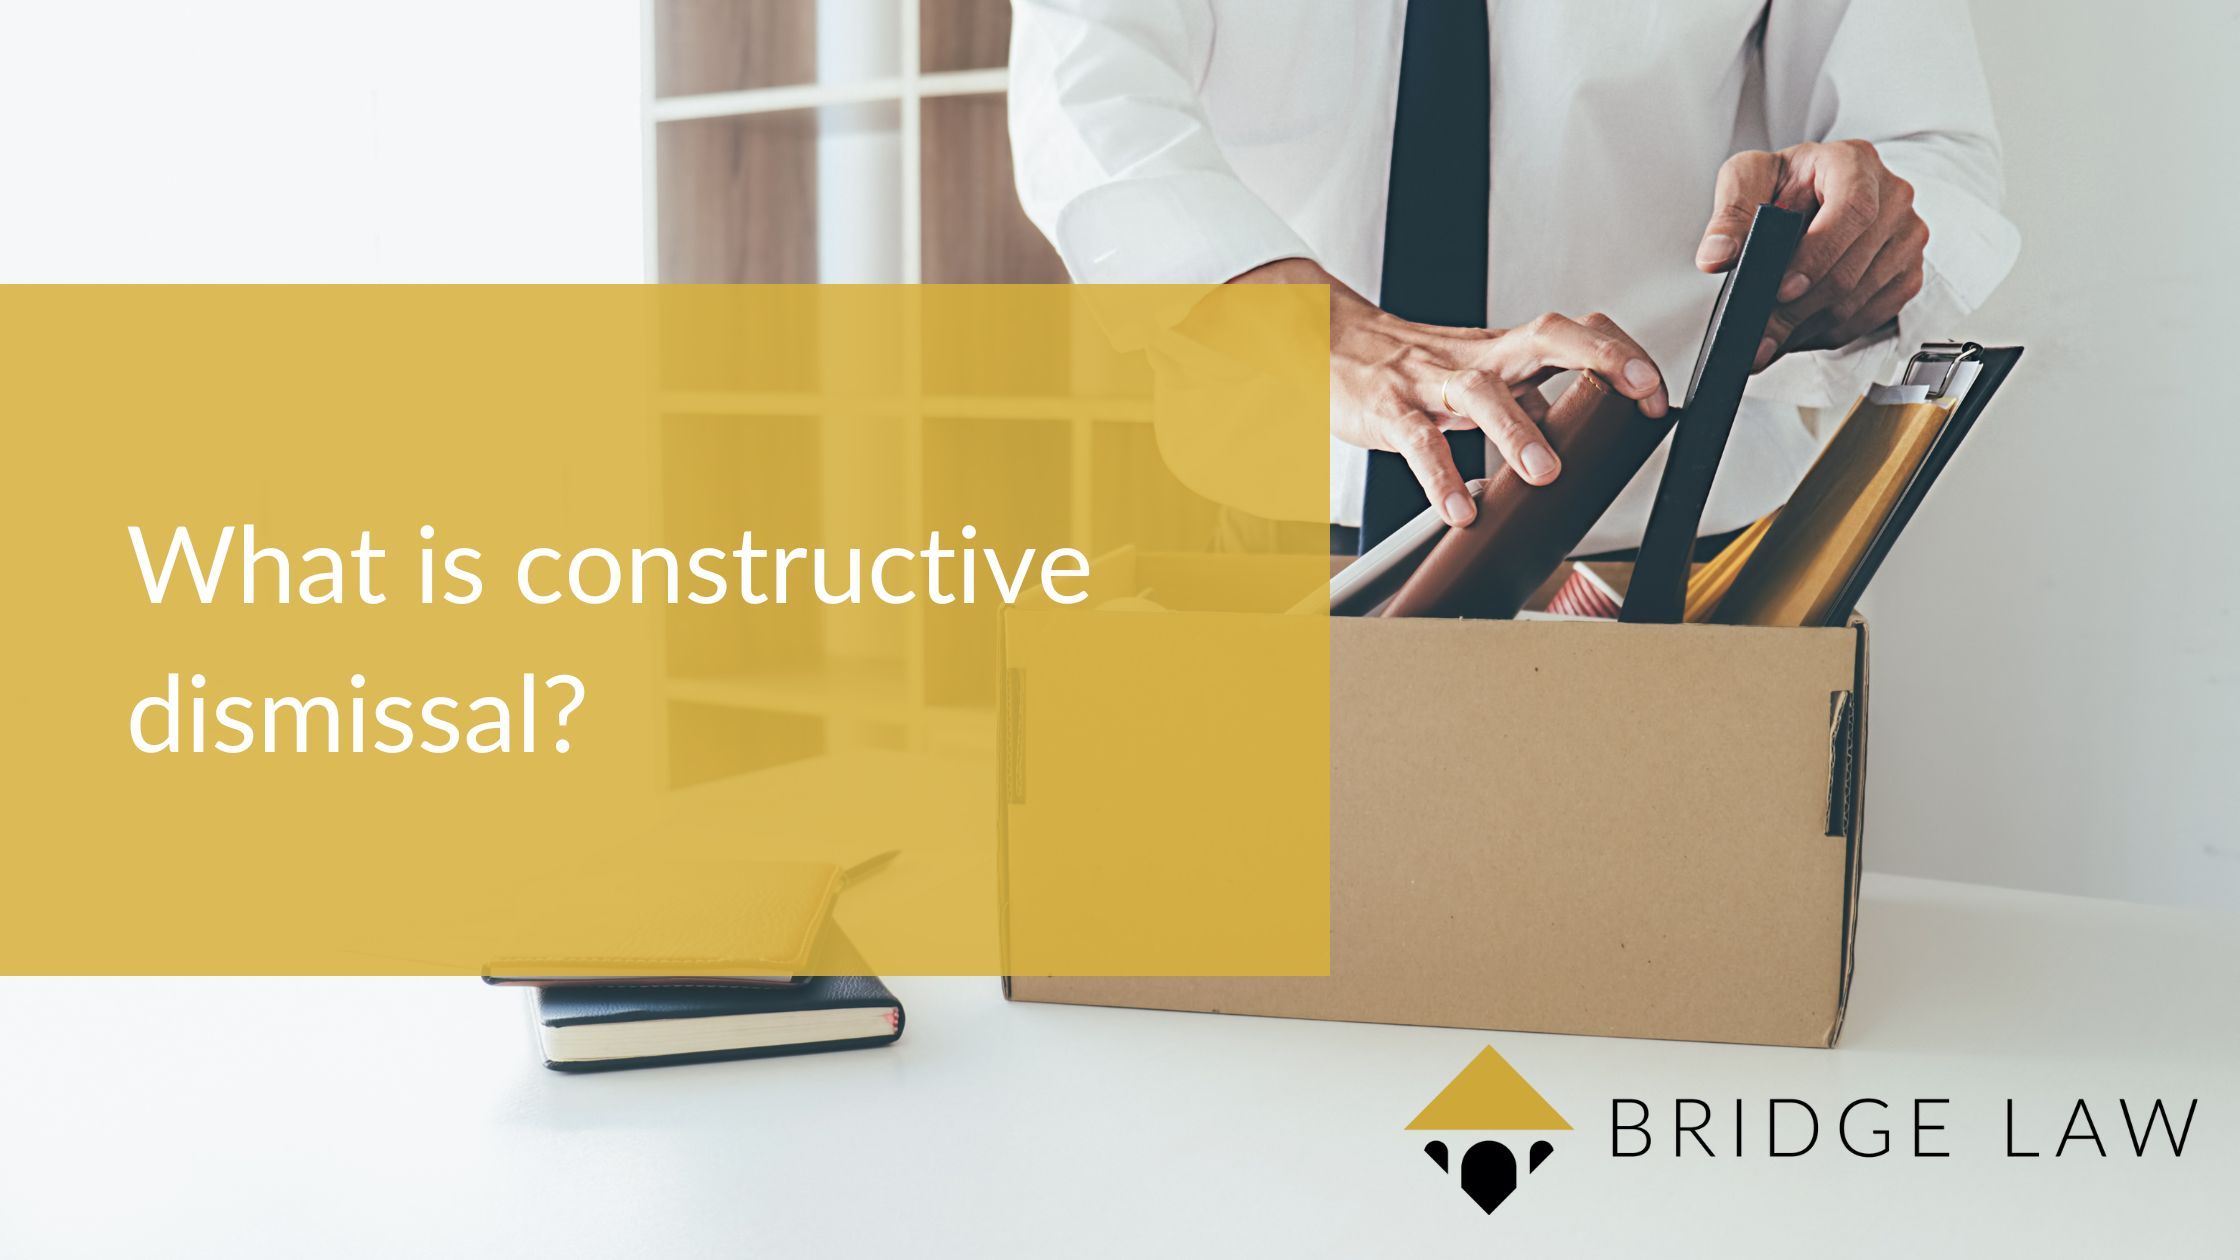 Bridge law blog header image with text 'what is constructive dismissal?'